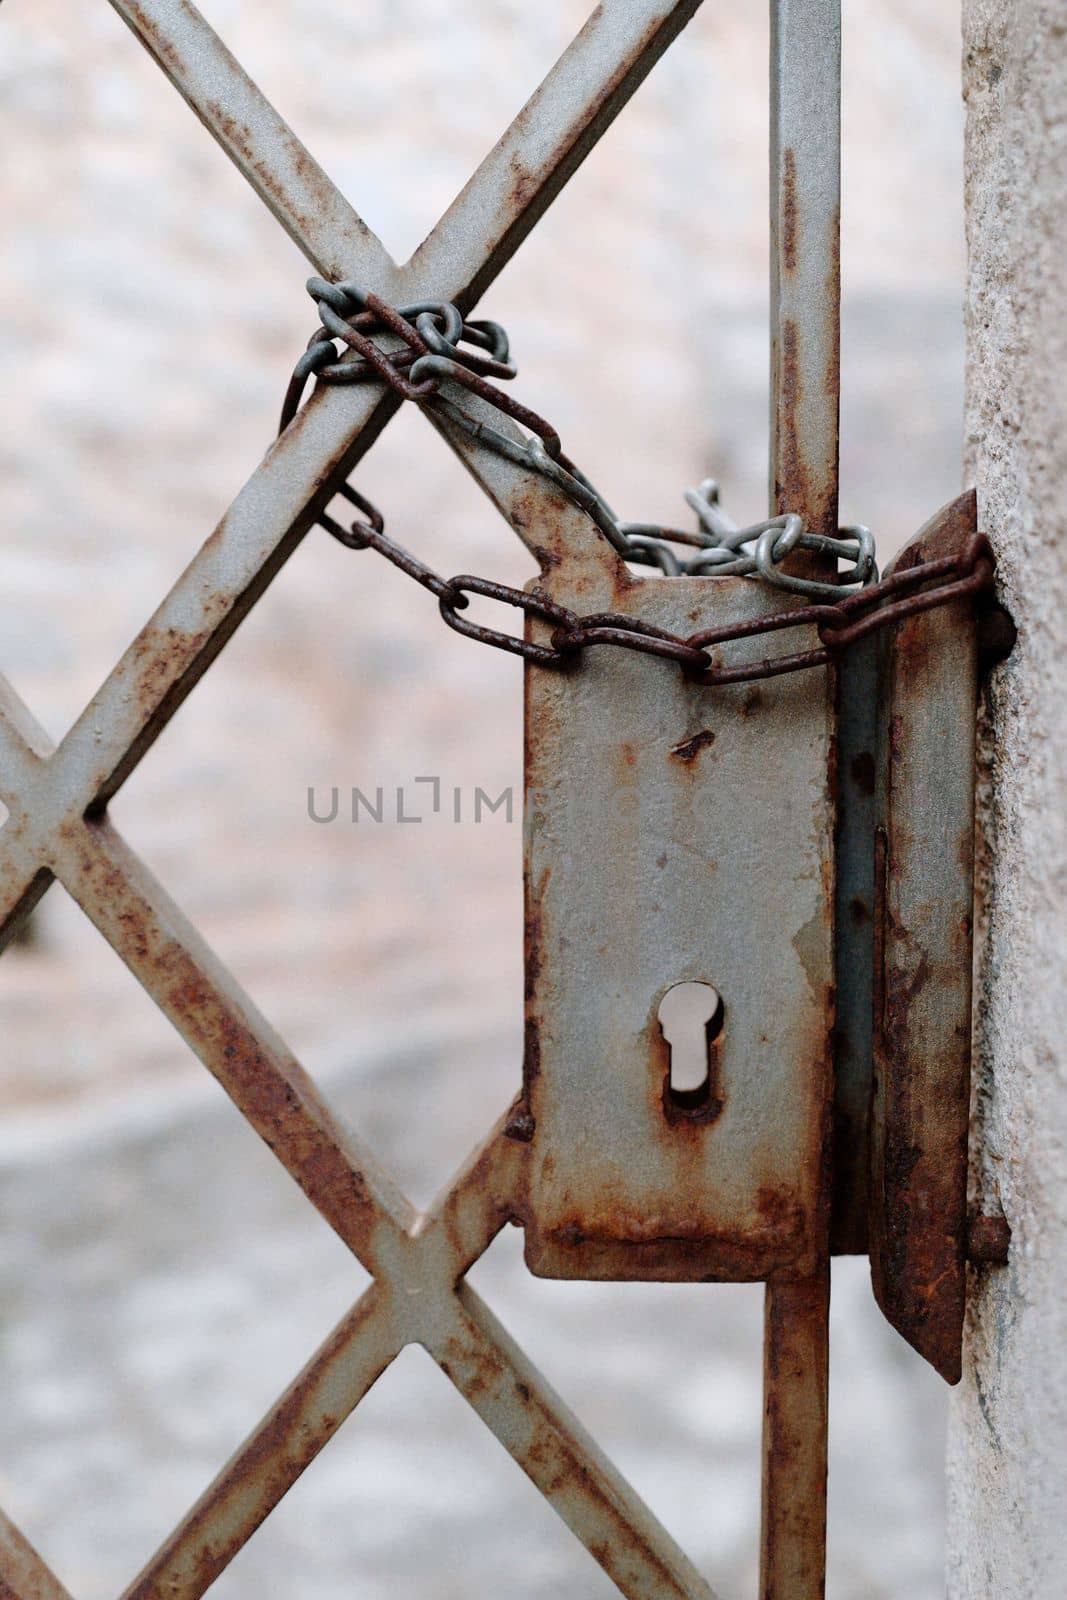 An old rusty garden gate without a lock is secured with a chain against unauthorized opening.